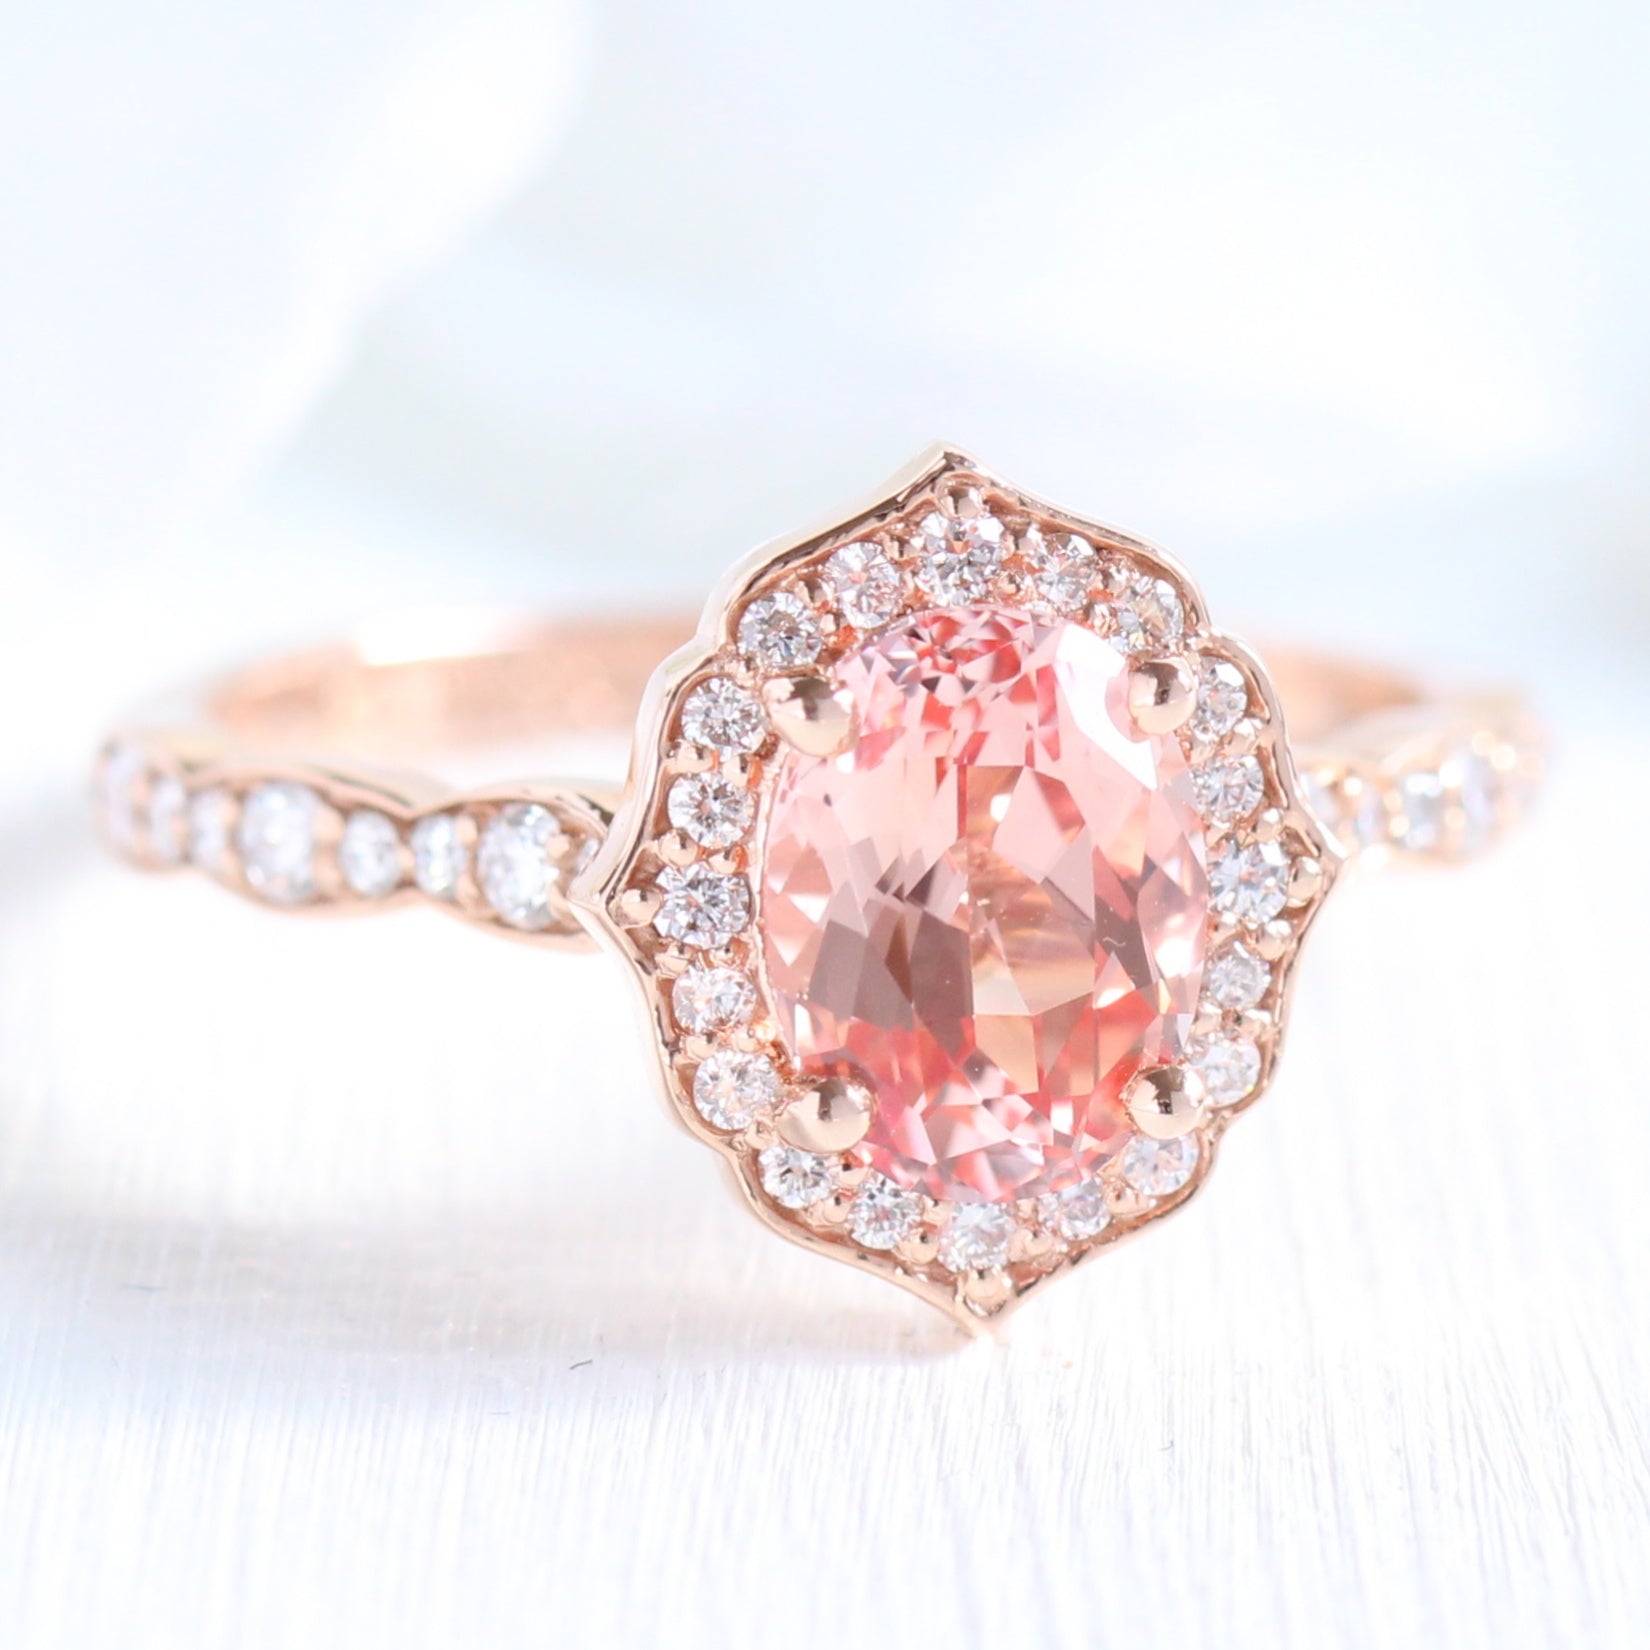 Vintage Floral Oval Ring Bridal Set w/ Peach Sapphire and Curved Leaf Diamond Band